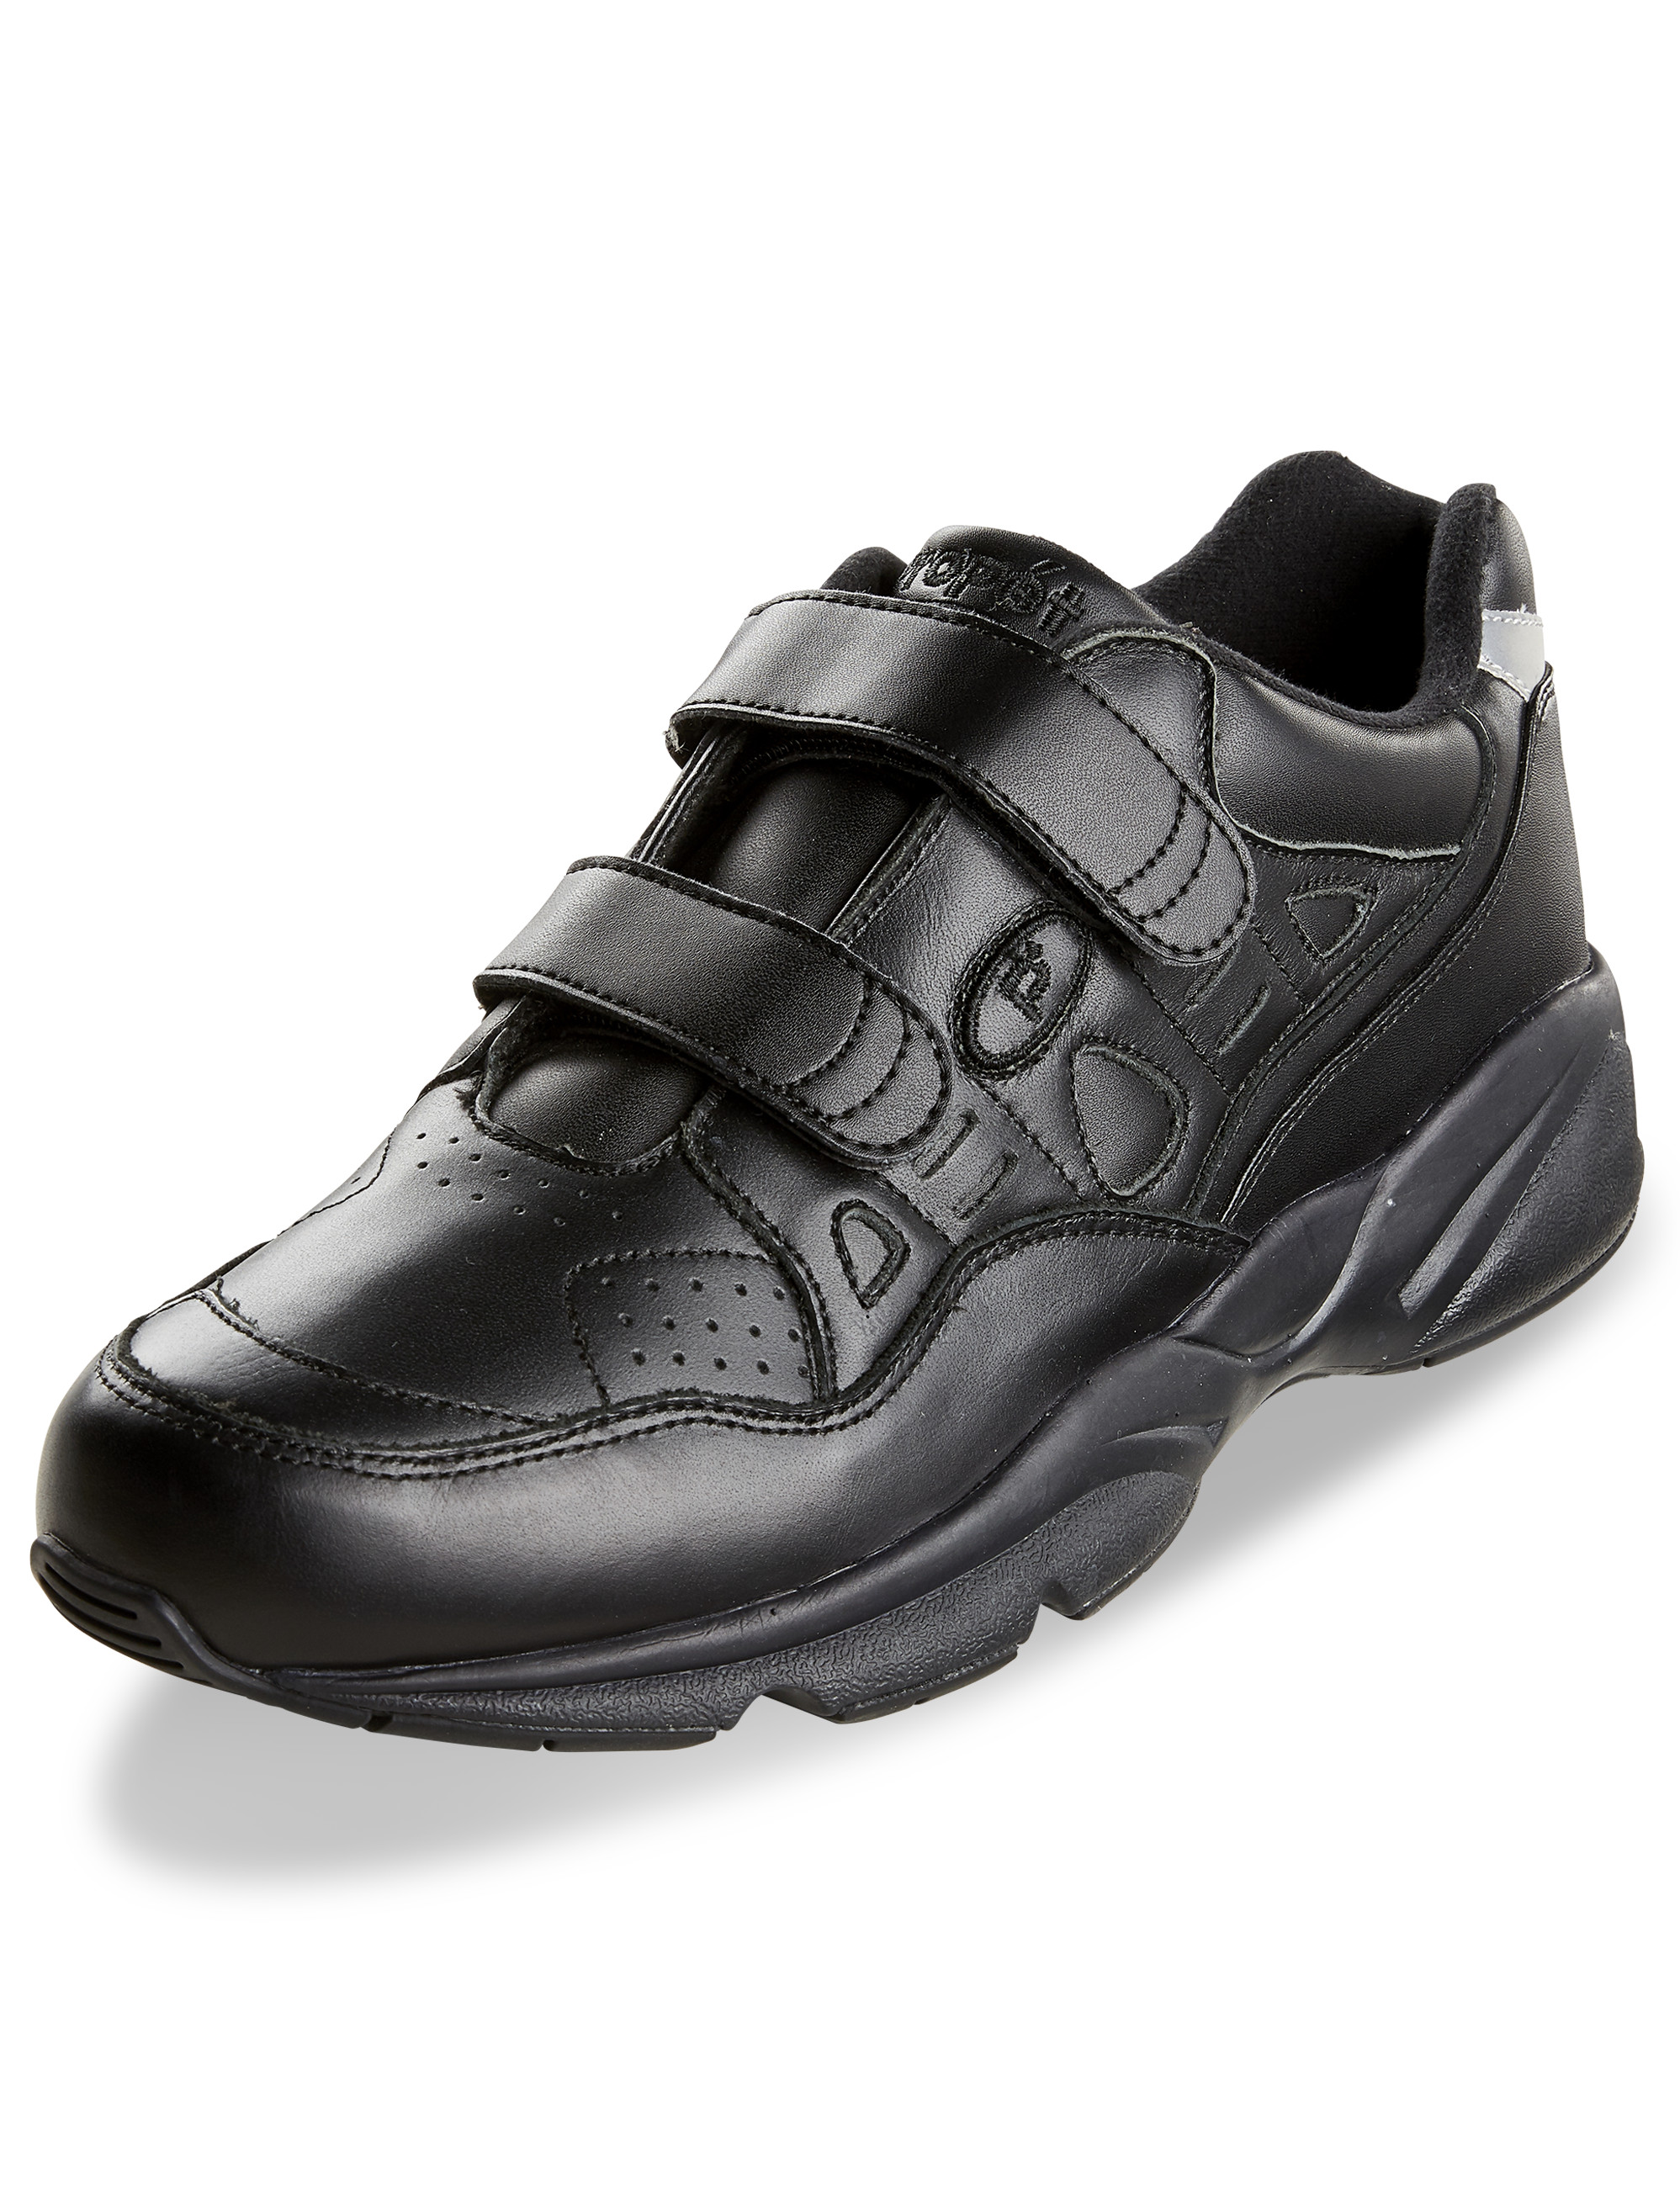 Big and Tall | Propét Stability Walking Shoes | DXL Men's Clothing Store